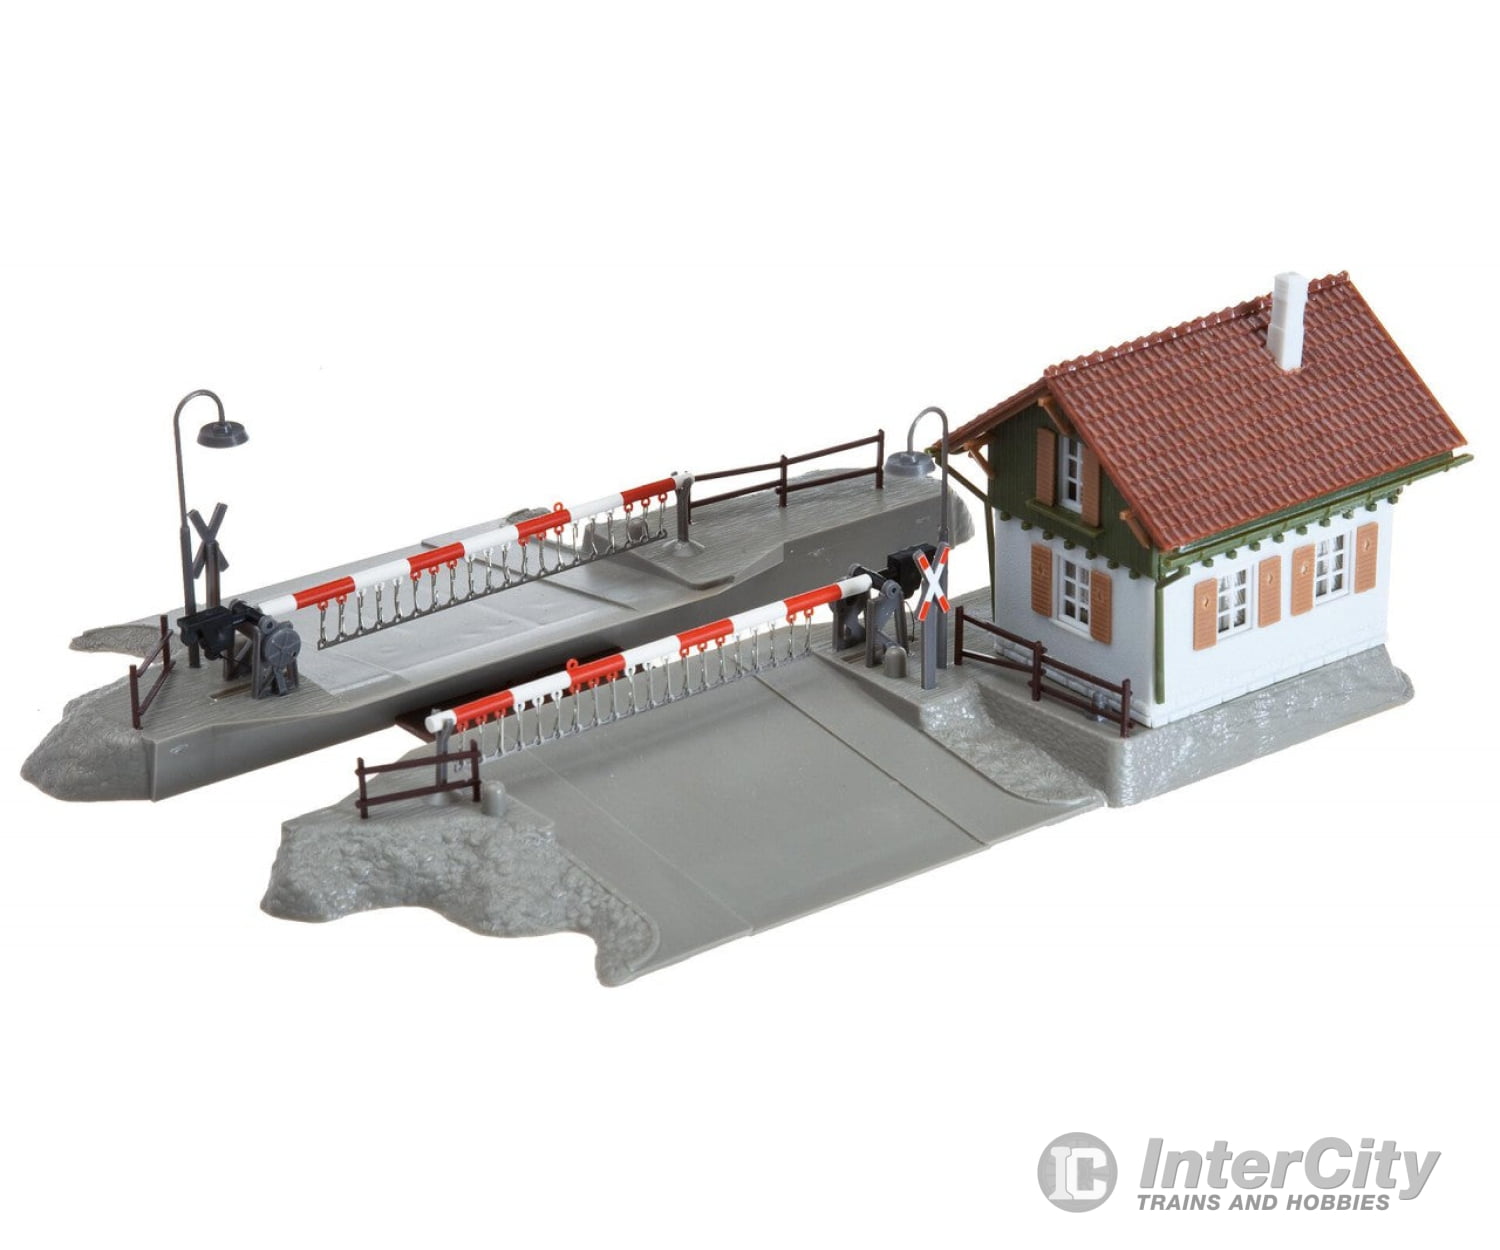 Faller 120174 Ho Level-Crossing With Gatekeeper’s House Structures